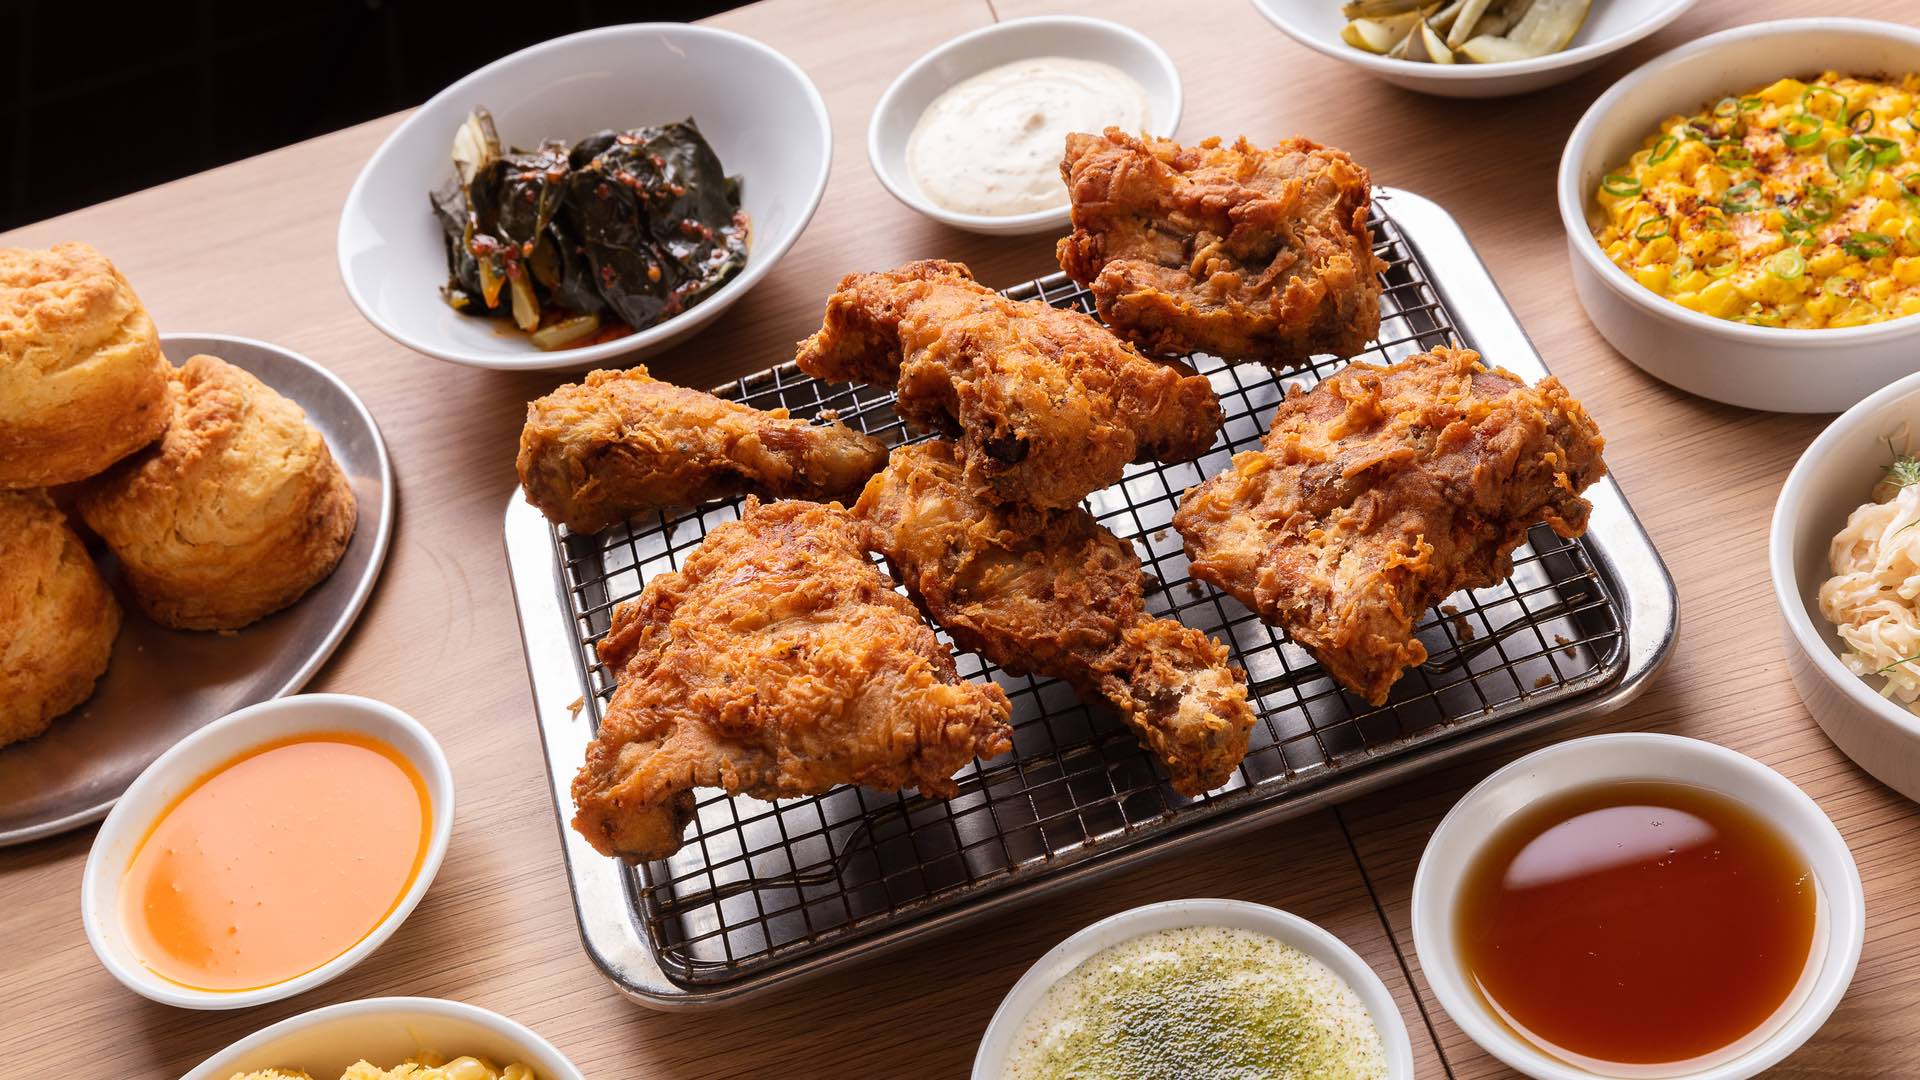 Enmore's The Gretz Has Become Wish Bone, an Eatery Dedicated to Fried Chicken